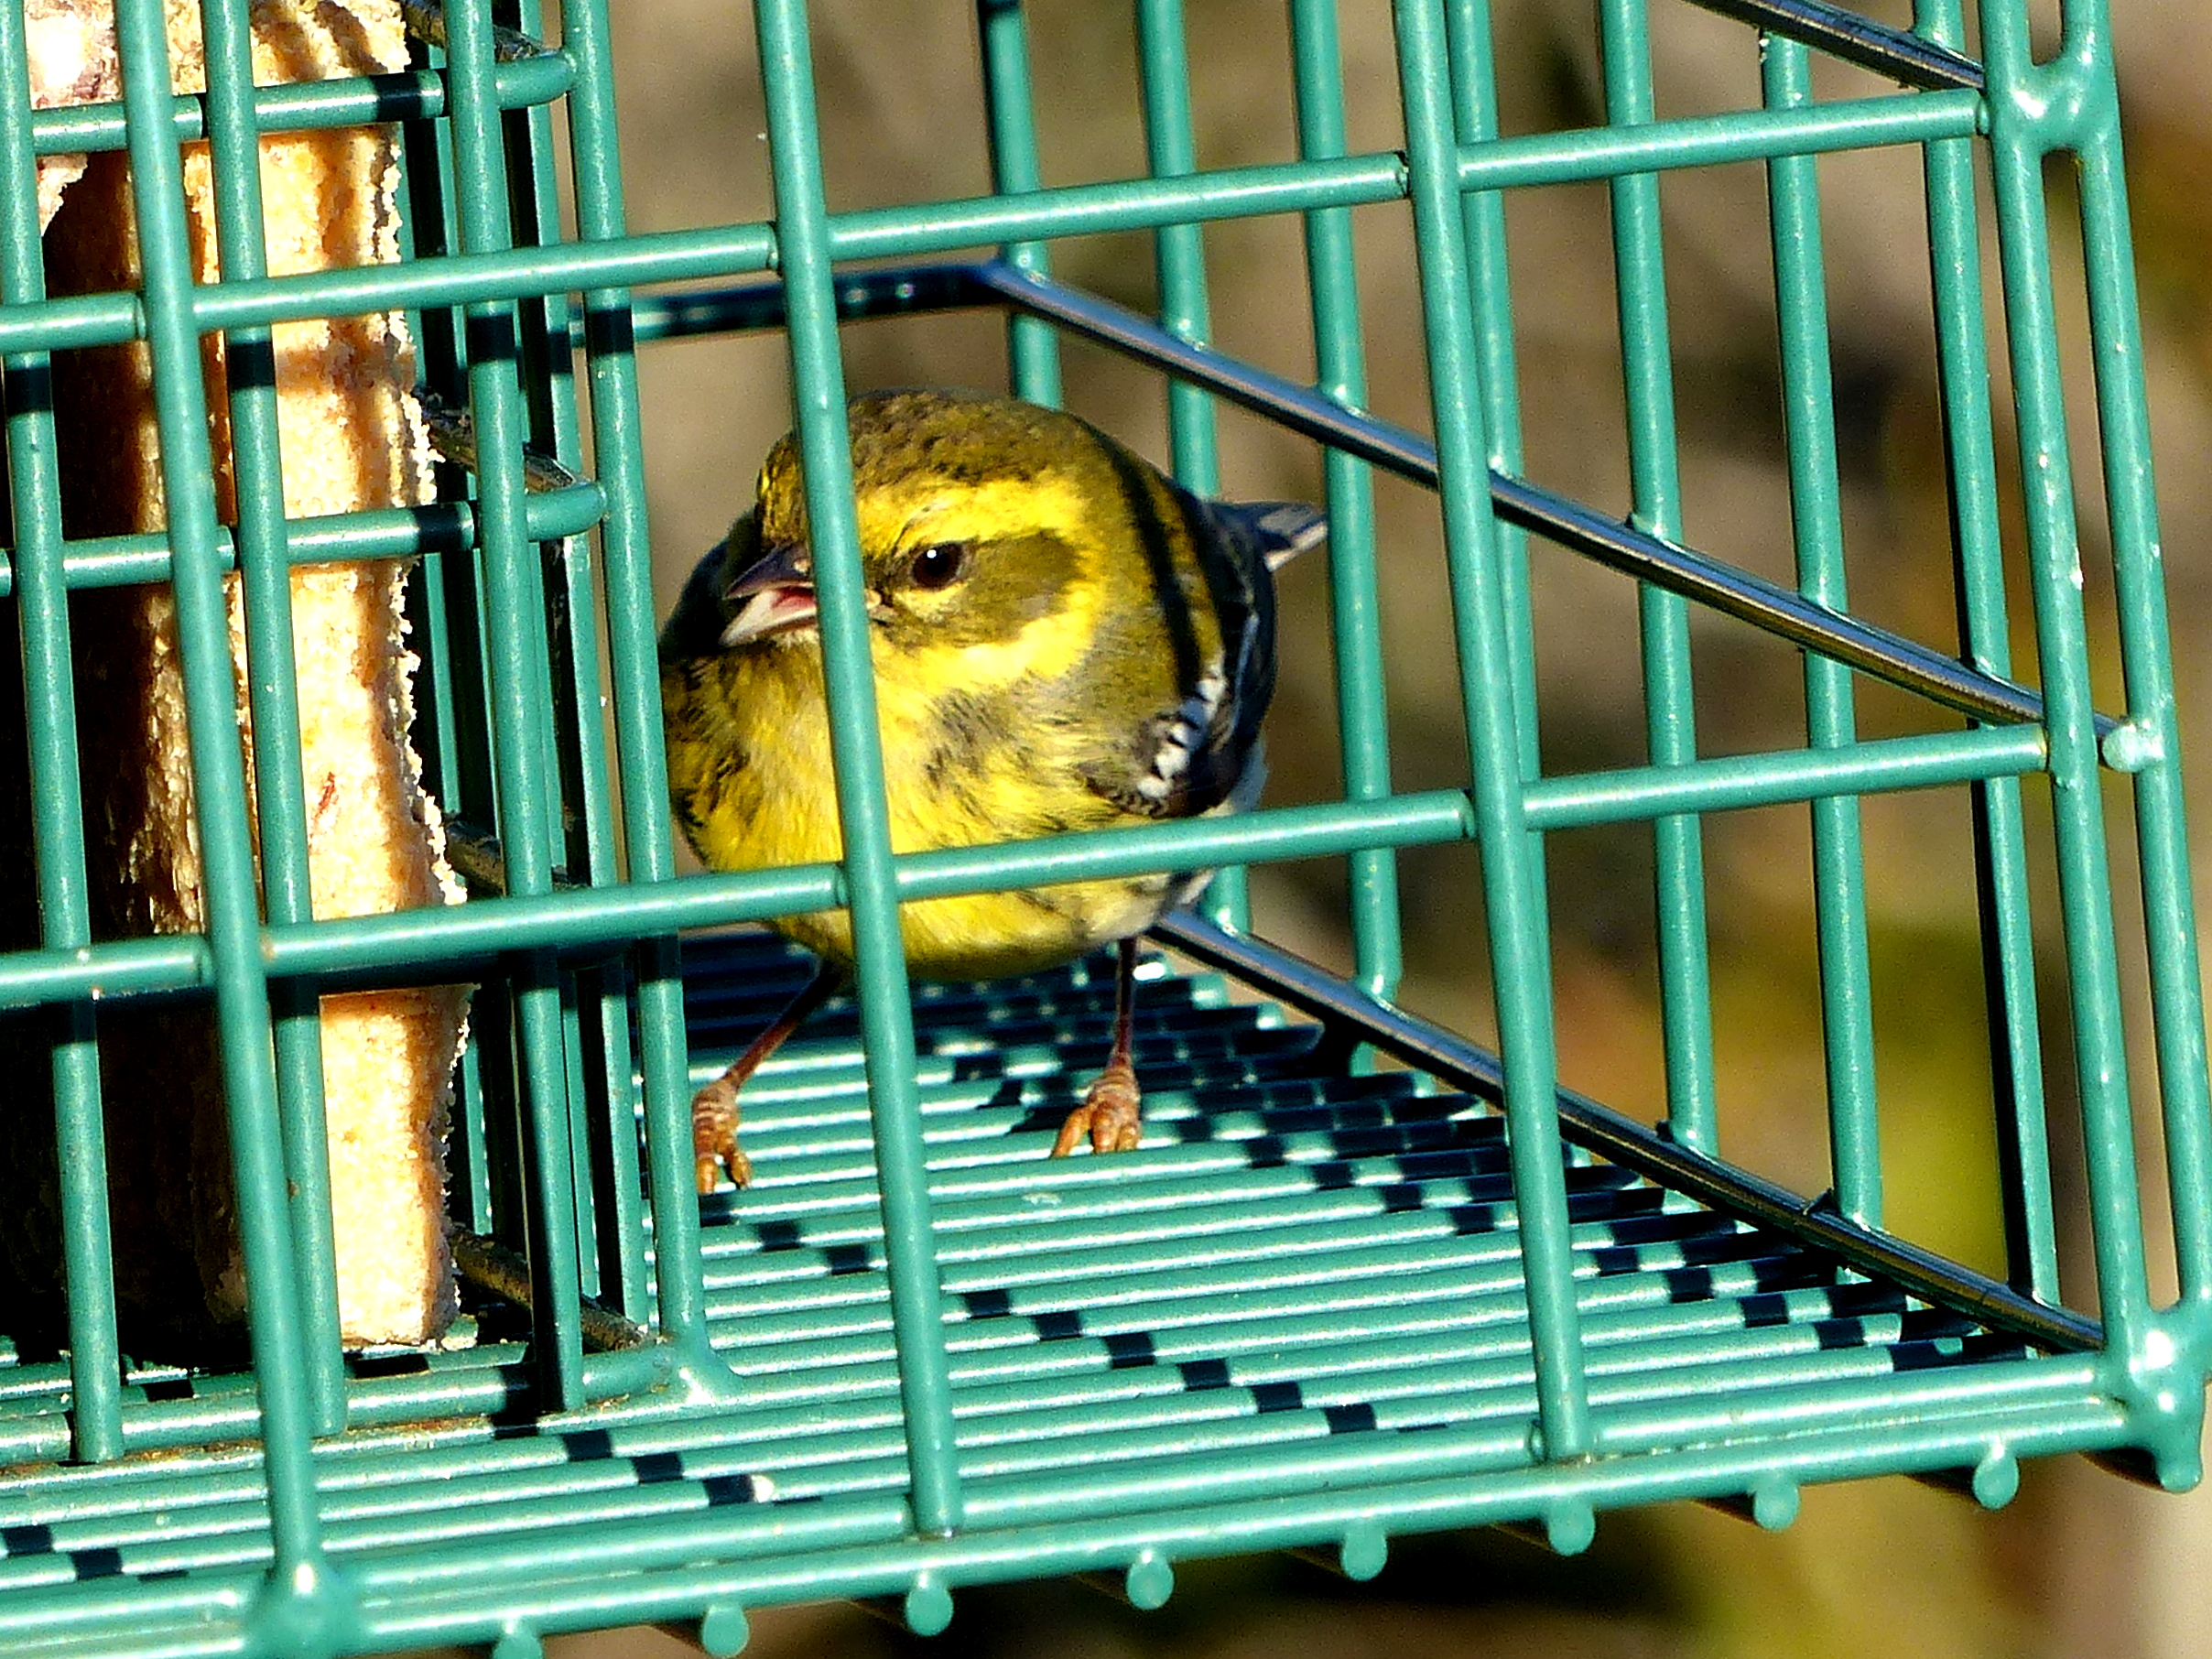 A female Townsend's Warbler feeds from suet inside a feeder that looks like a cage